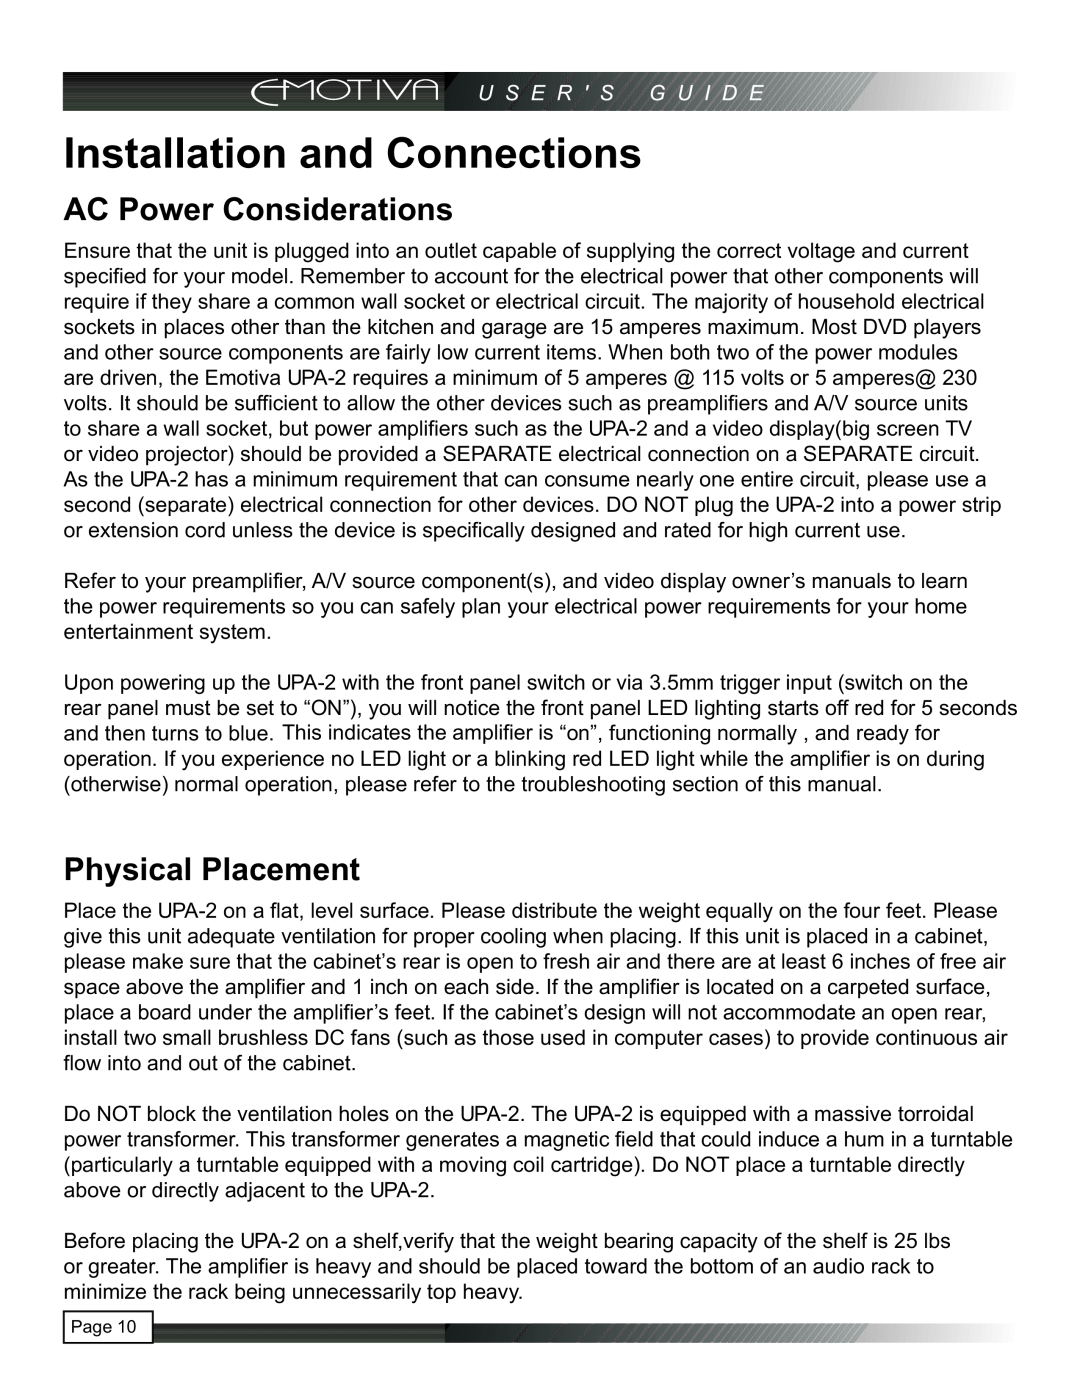 Emotiva UPA-2 manual Installation and Connections, AC Power Considerations, Physical Placement 